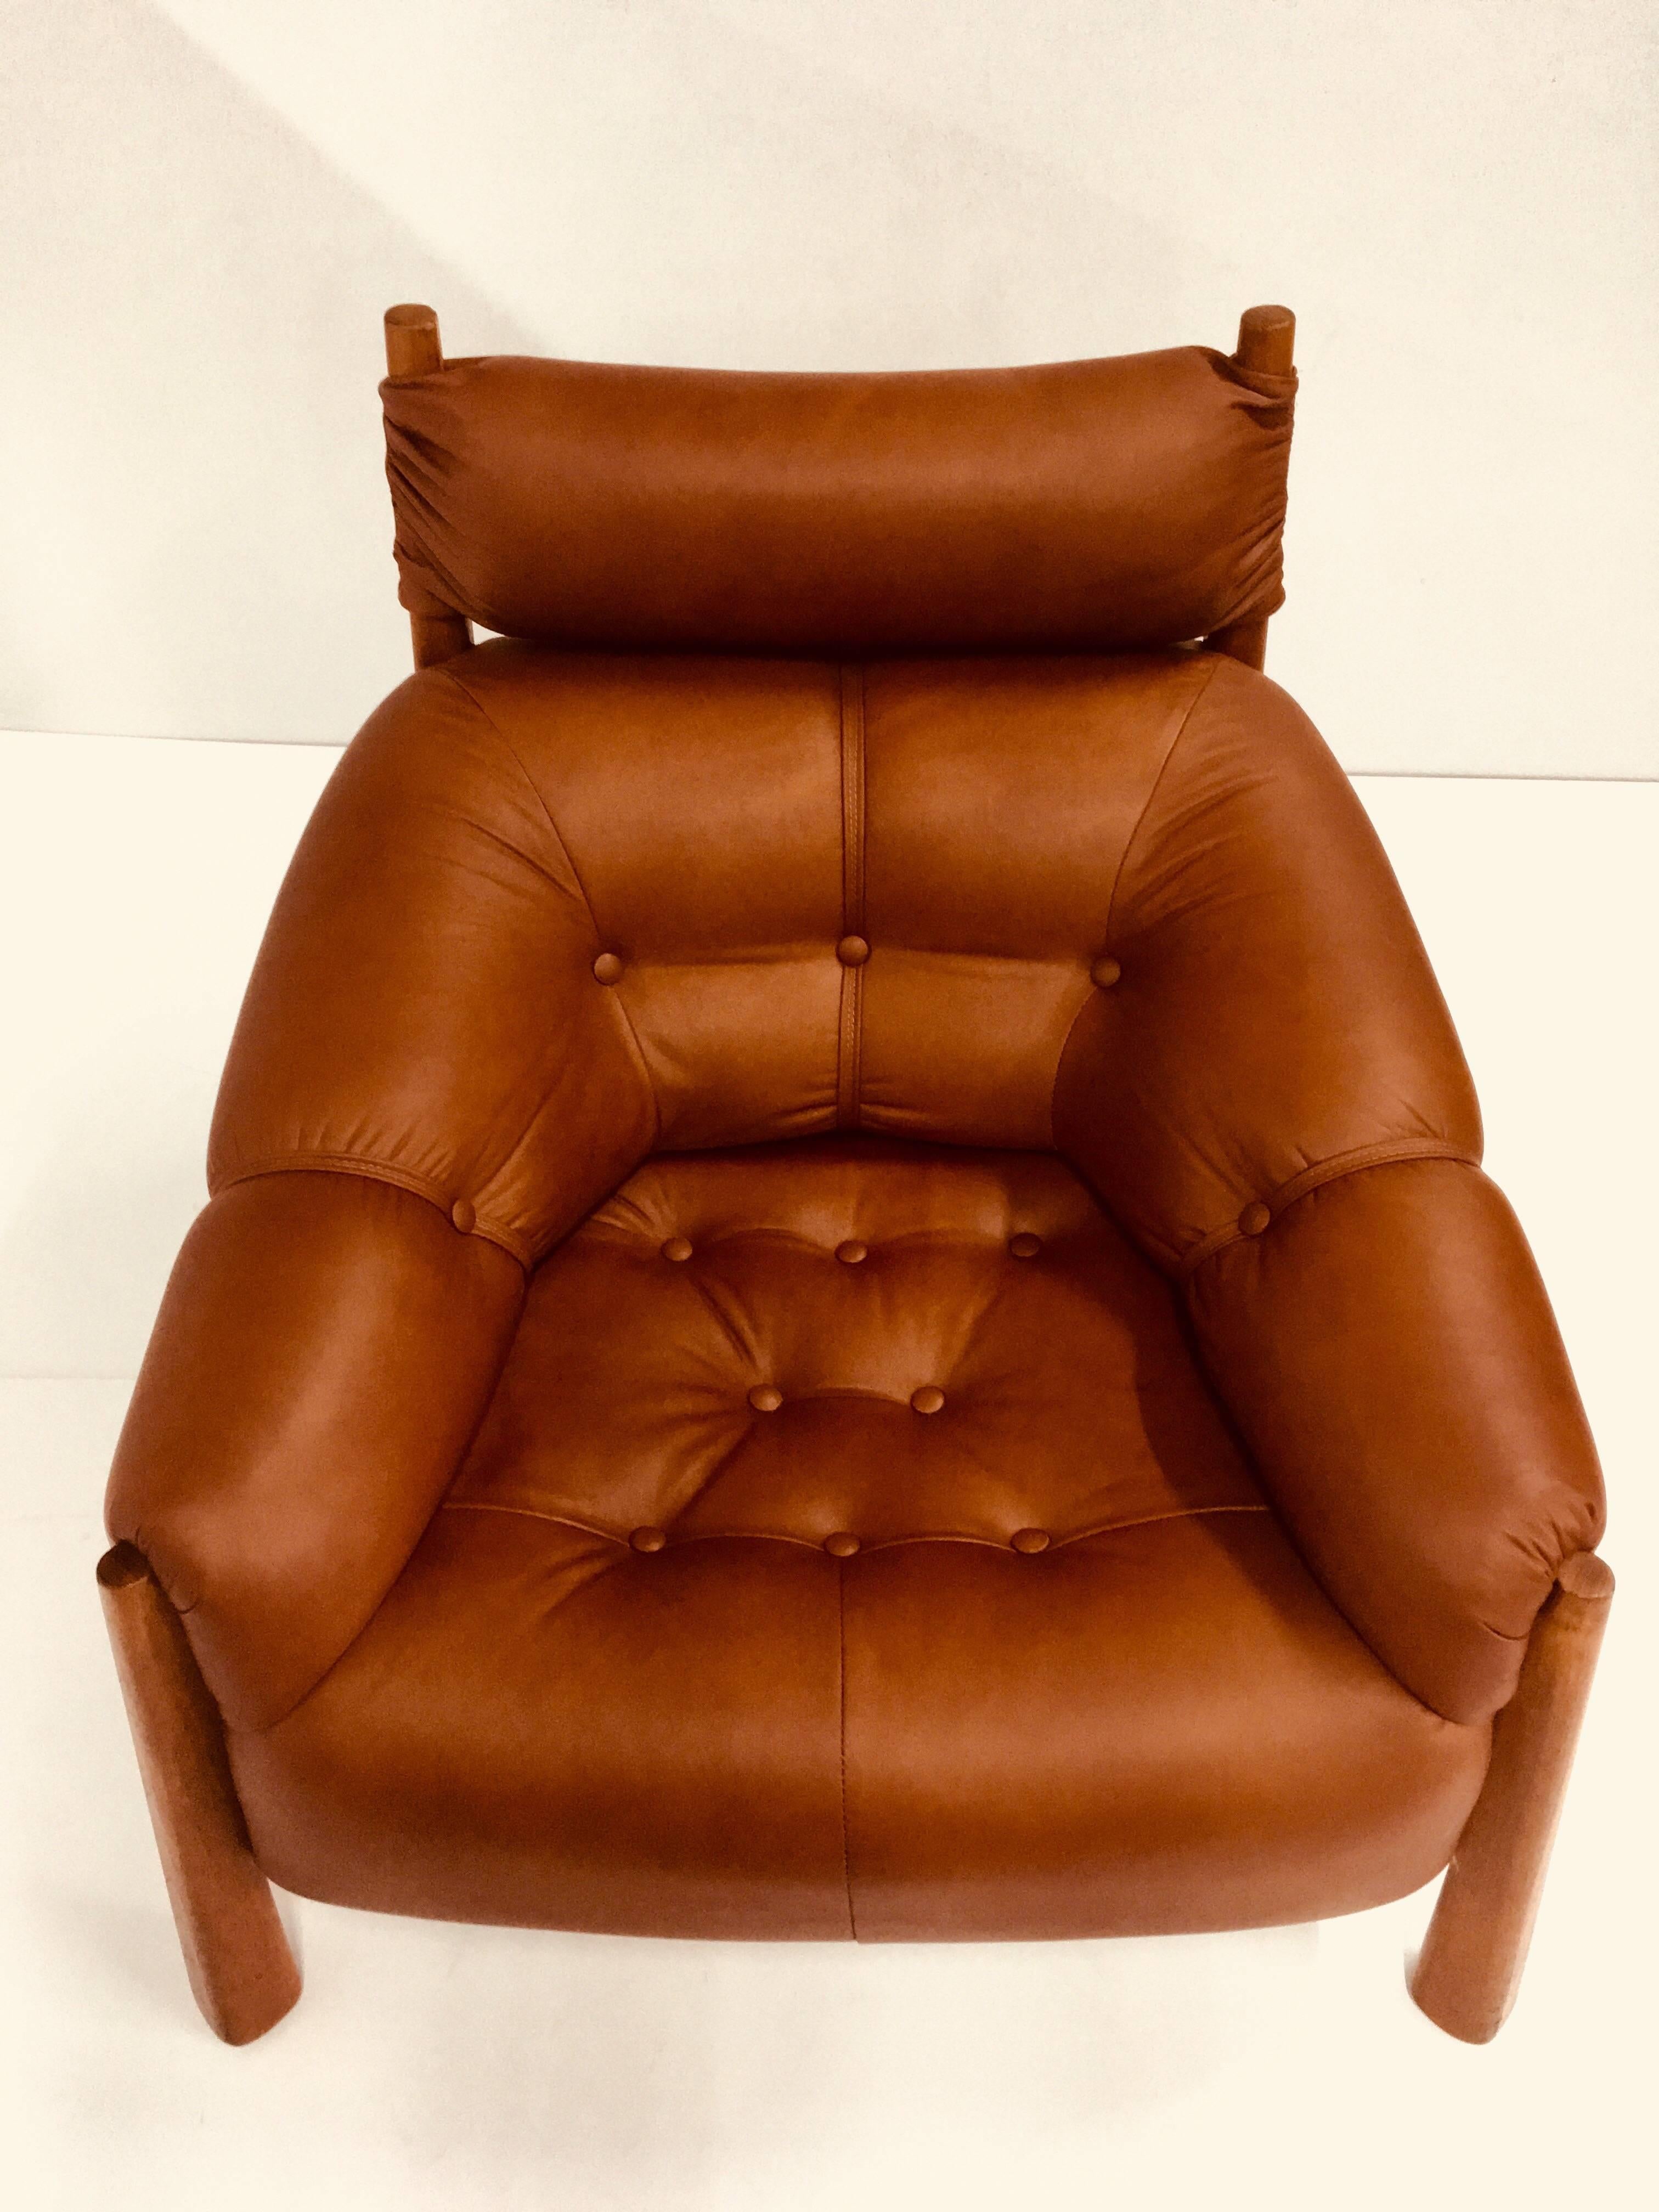 Mid-20th Century Percival Lafer Leather Armchair, circa 1960s